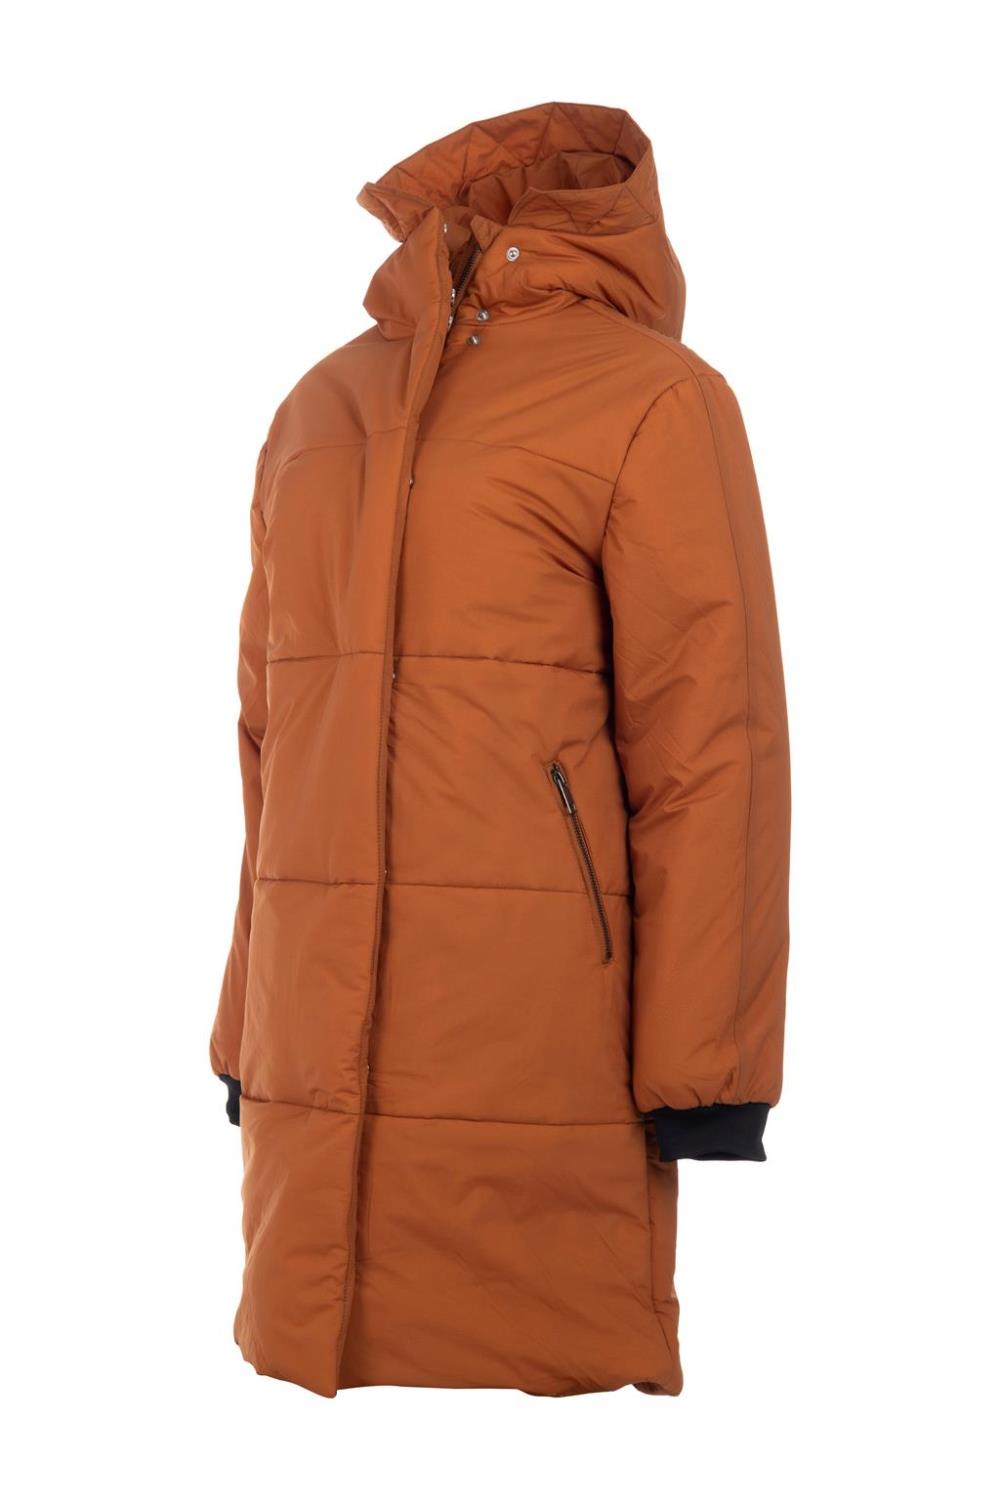 Move on Oppdal isolight coat W Rust